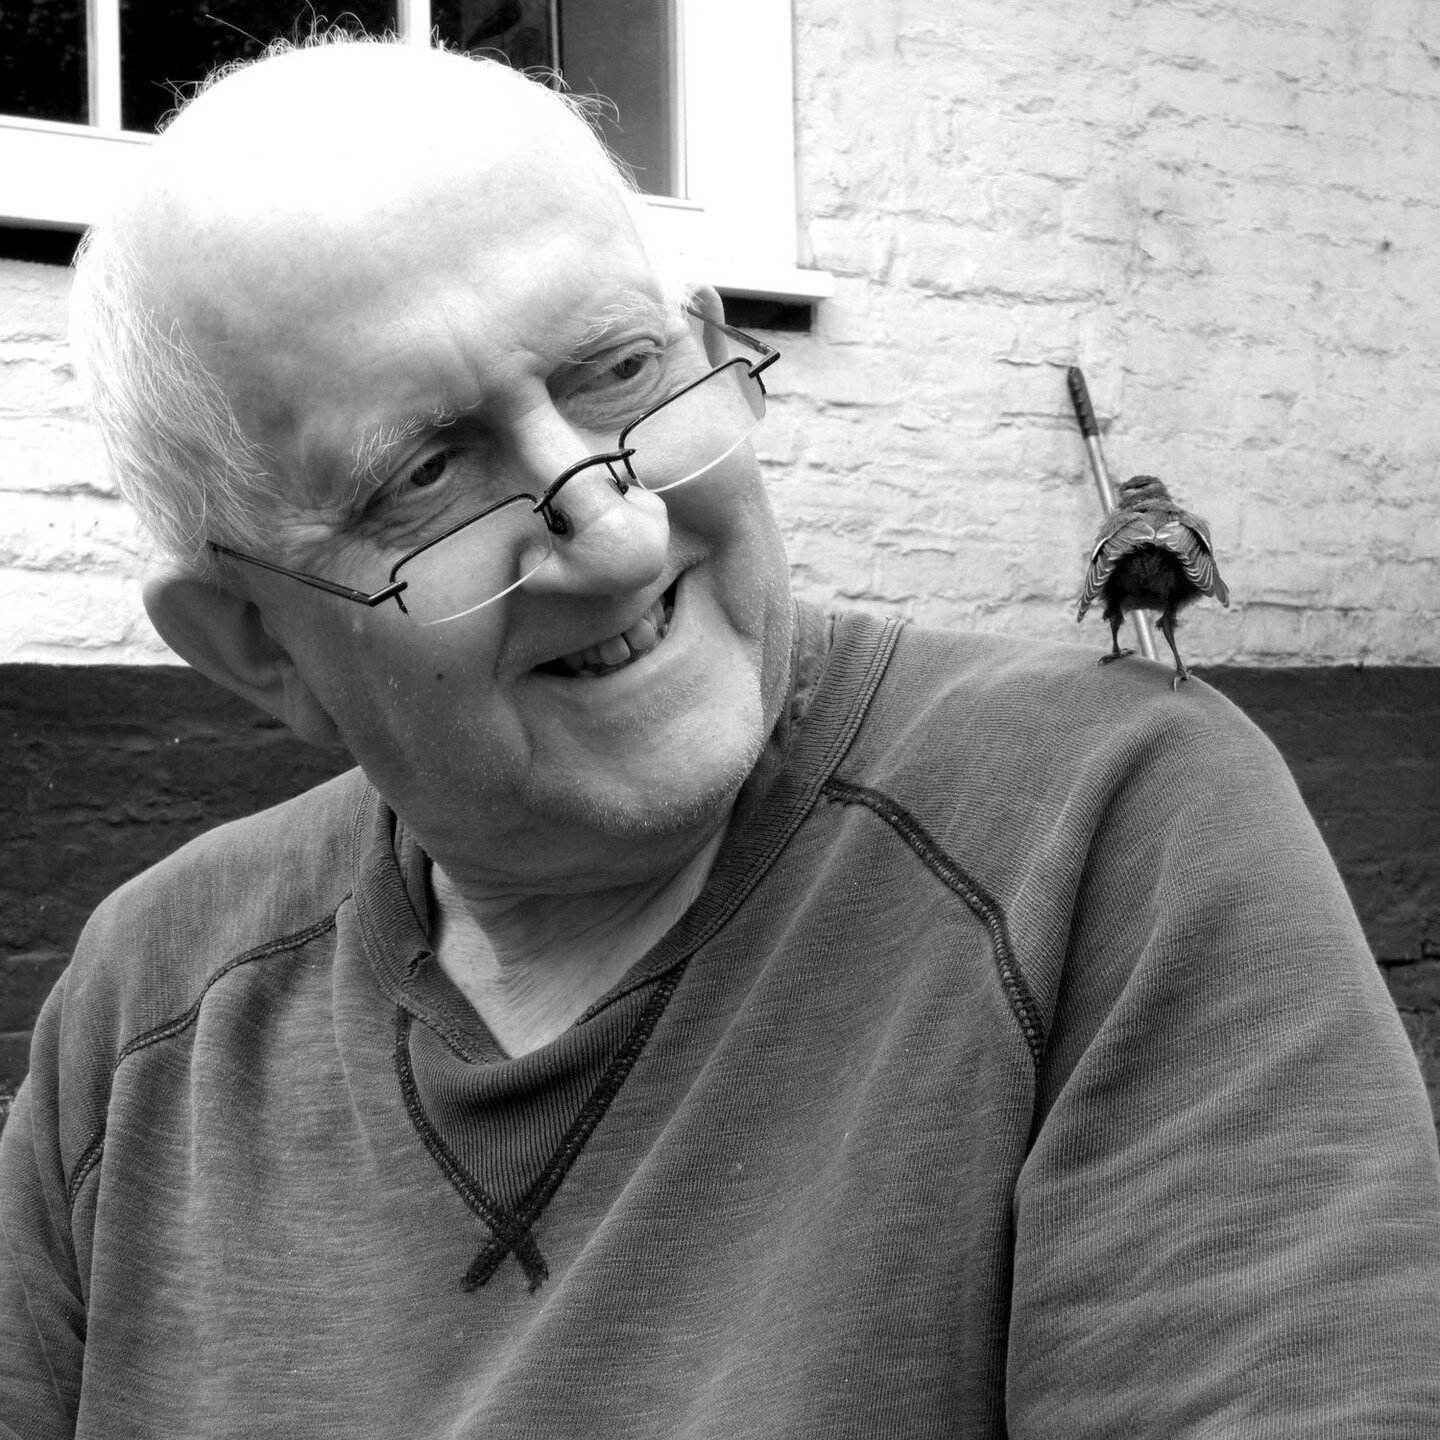 Neil Cooke
A celebration of Neil&rsquo;s life
Wednesday 14th September
Old Catton Parish church, 12 noon